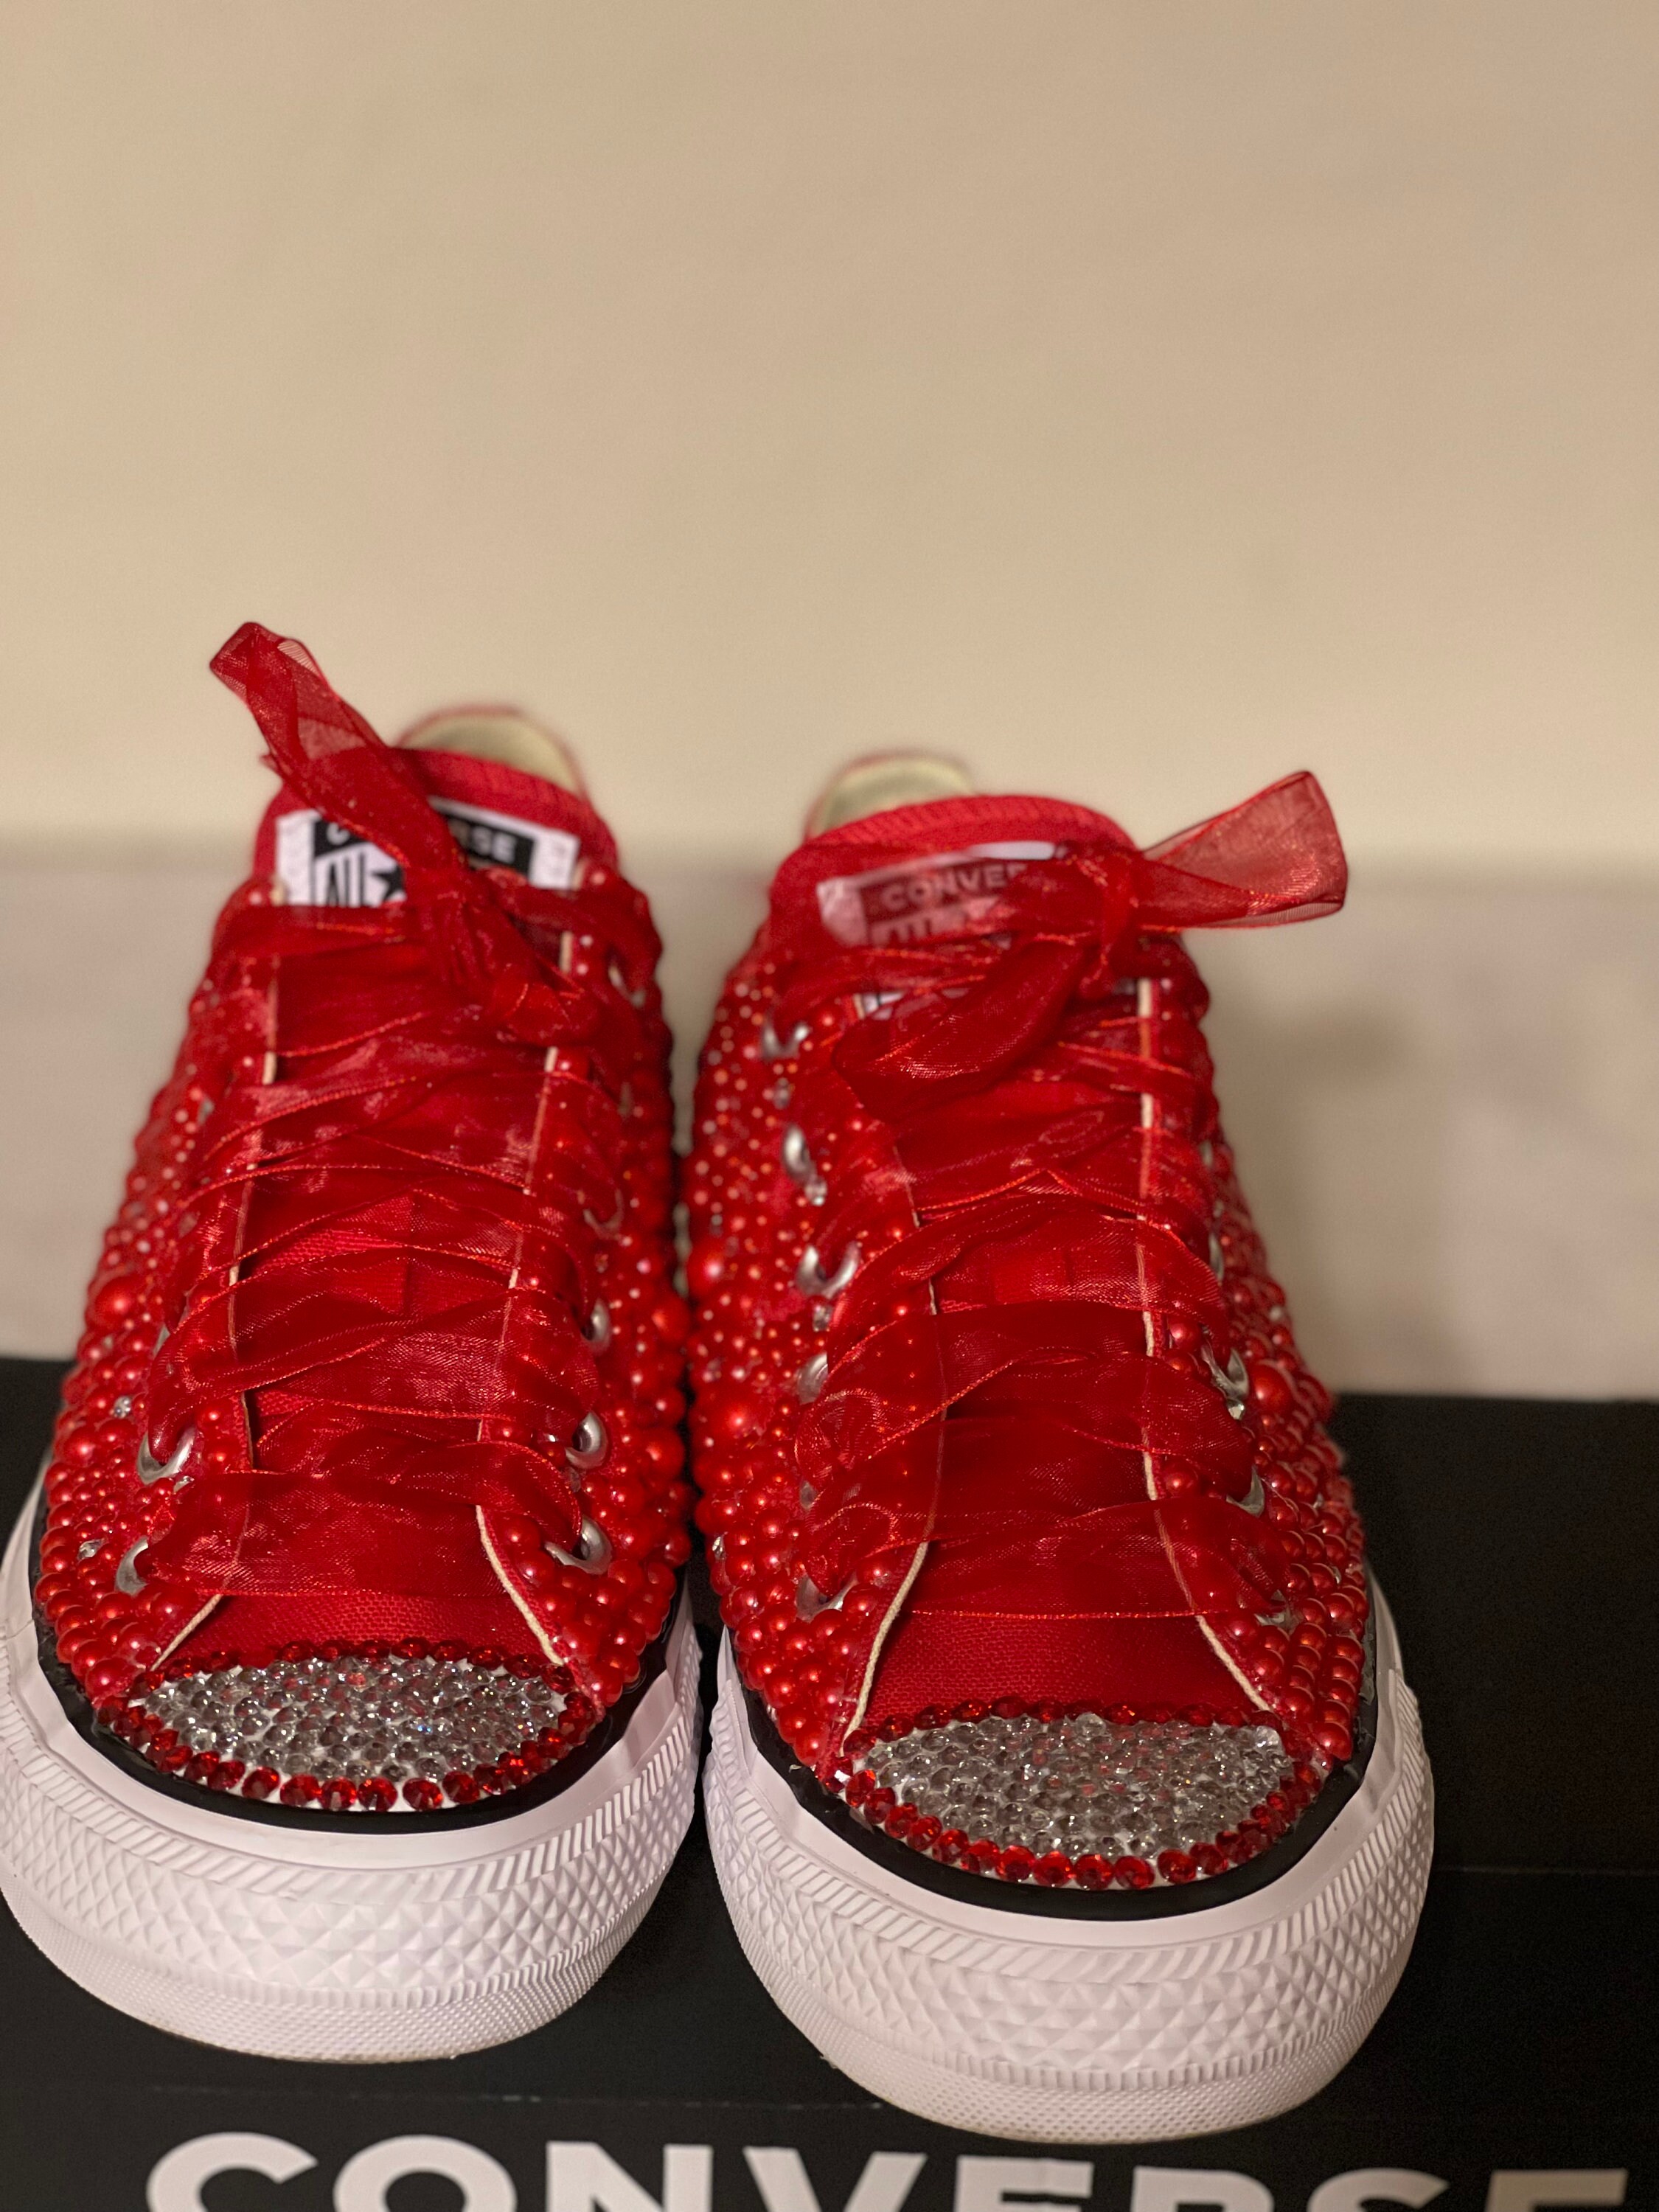 WOMEN Red Bling Converse All Star Chuck Taylor Sneakers LOW | Etsy